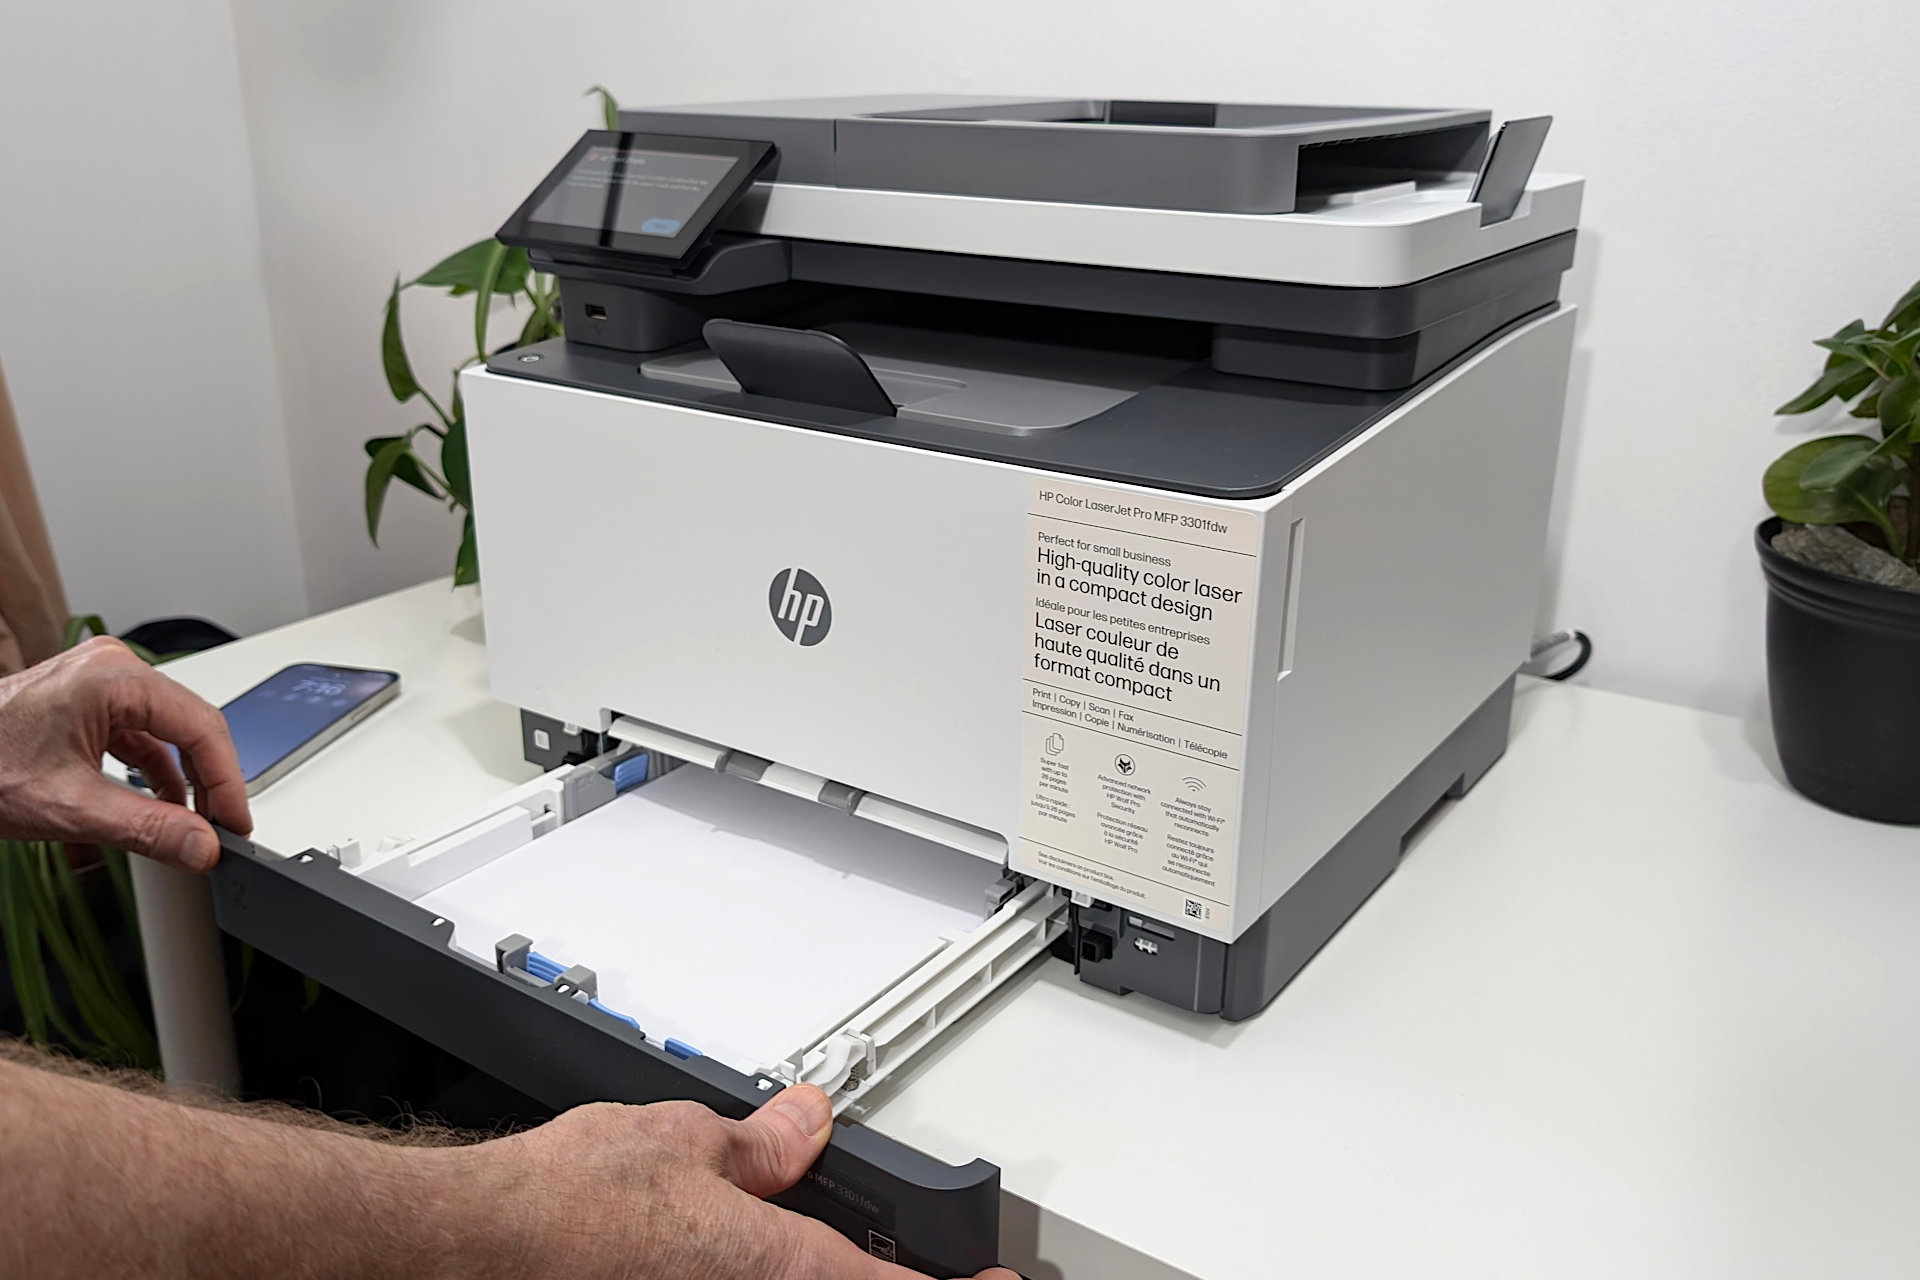 The overall design of the Color LaserJet Pro MFP 3301fdw is good, but the media tray is just a slot.